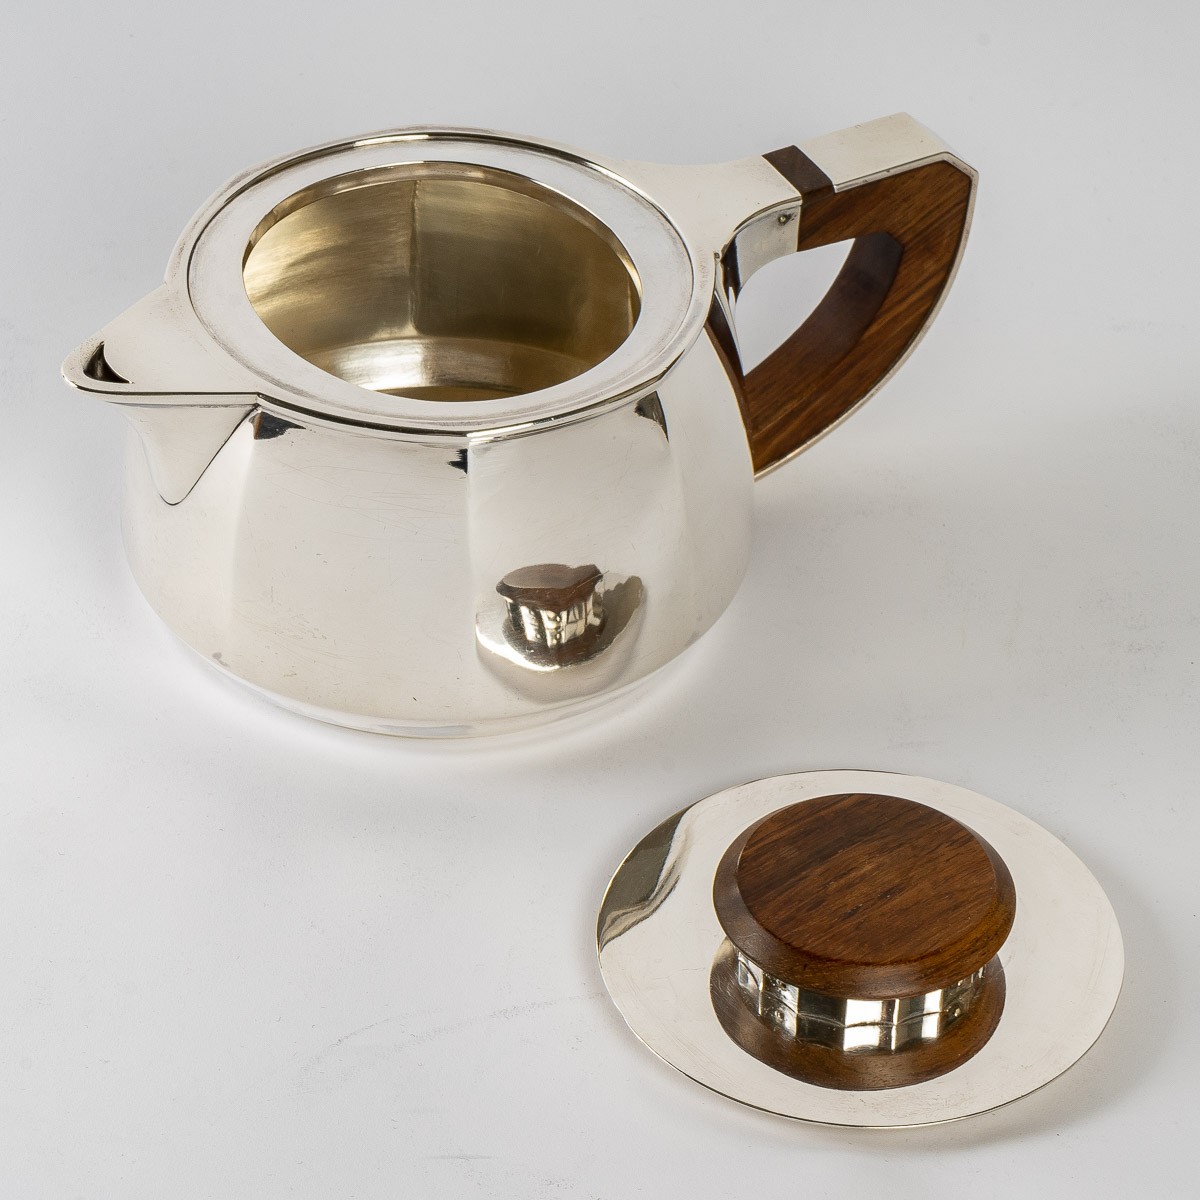 French solid silver-gilt seven-piece tea and coffee service by Puiforcat -  Ref.98693